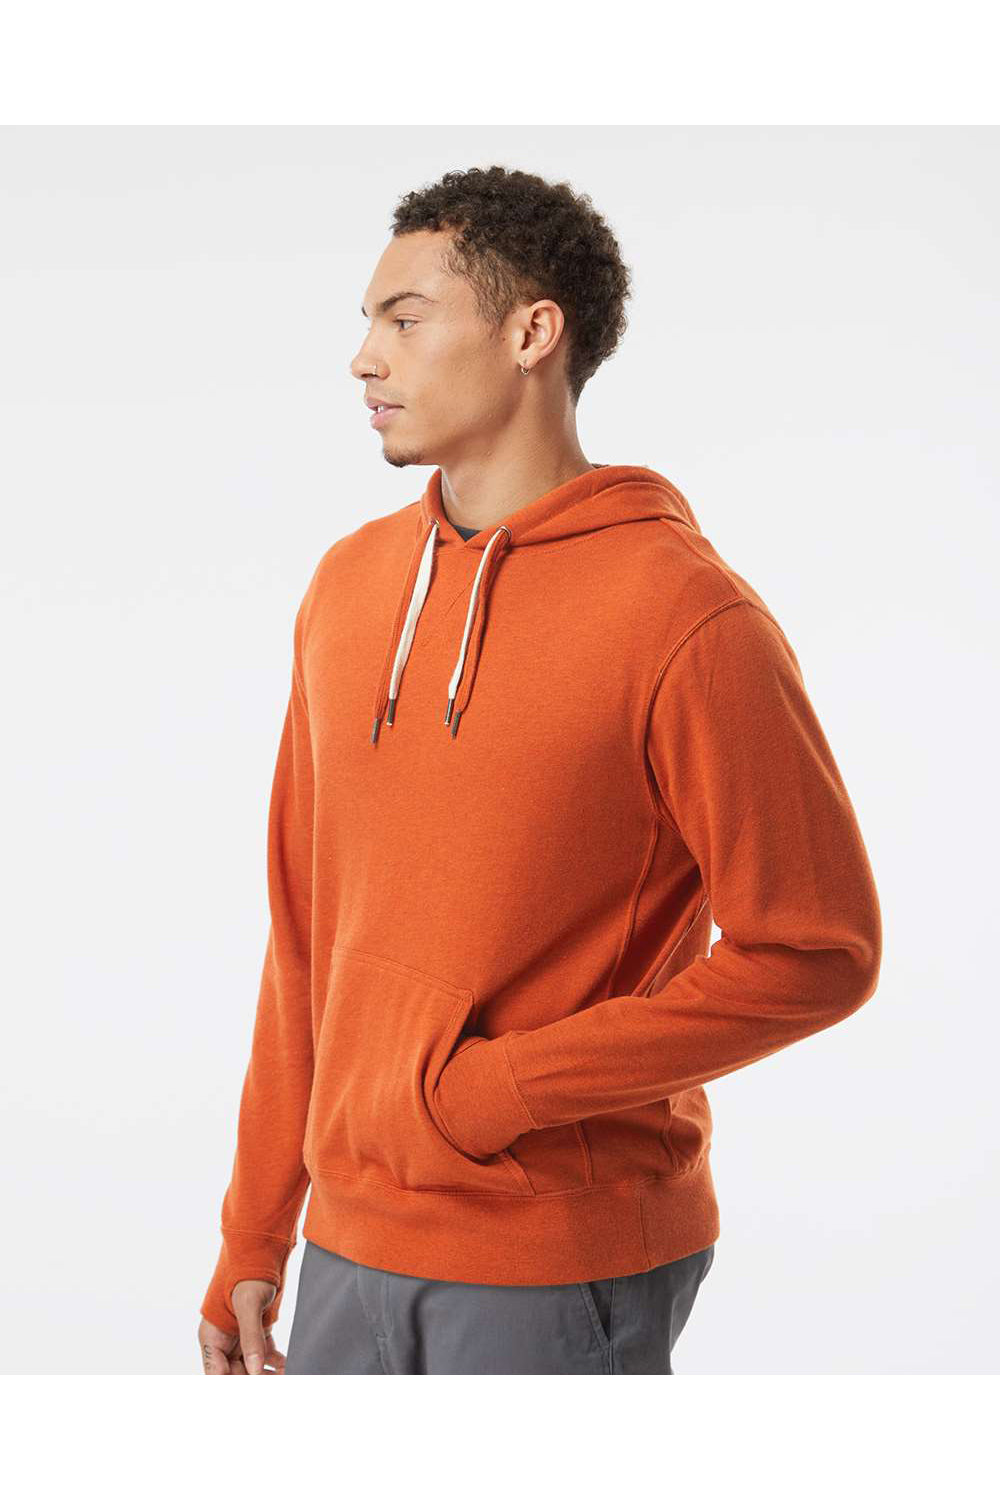 Independent Trading Co. PRM90HT Mens French Terry Hooded Sweatshirt Hoodie Heather Burnt Orange Model Side